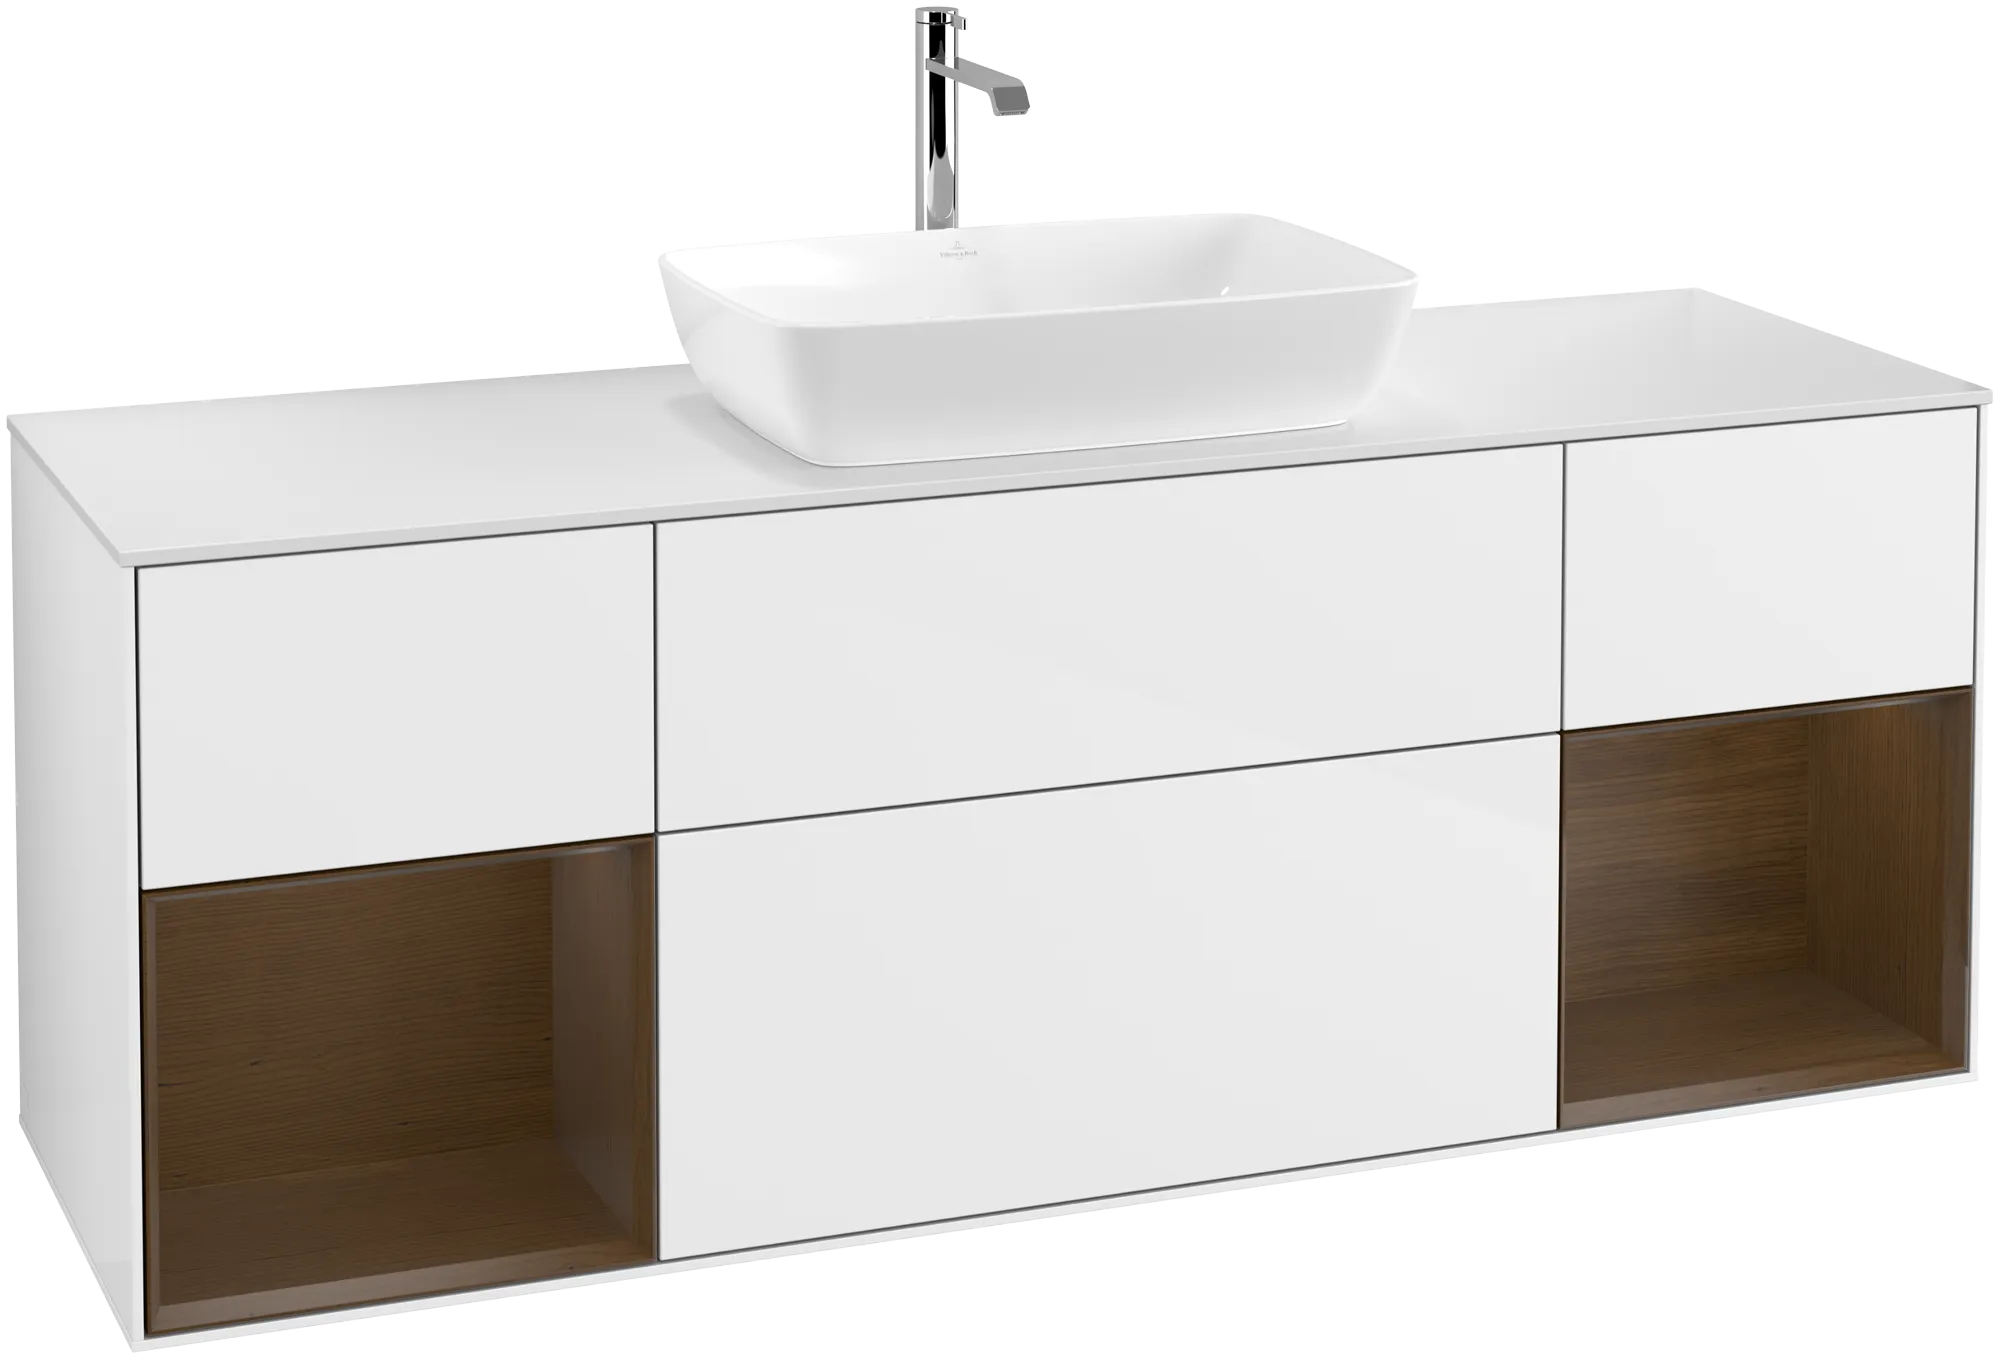 Picture of VILLEROY BOCH Finion Vanity unit, with lighting, 4 pull-out compartments, 1600 x 603 x 501 mm, Glossy White Lacquer / Walnut Veneer / Glass White Matt #G861GNGF